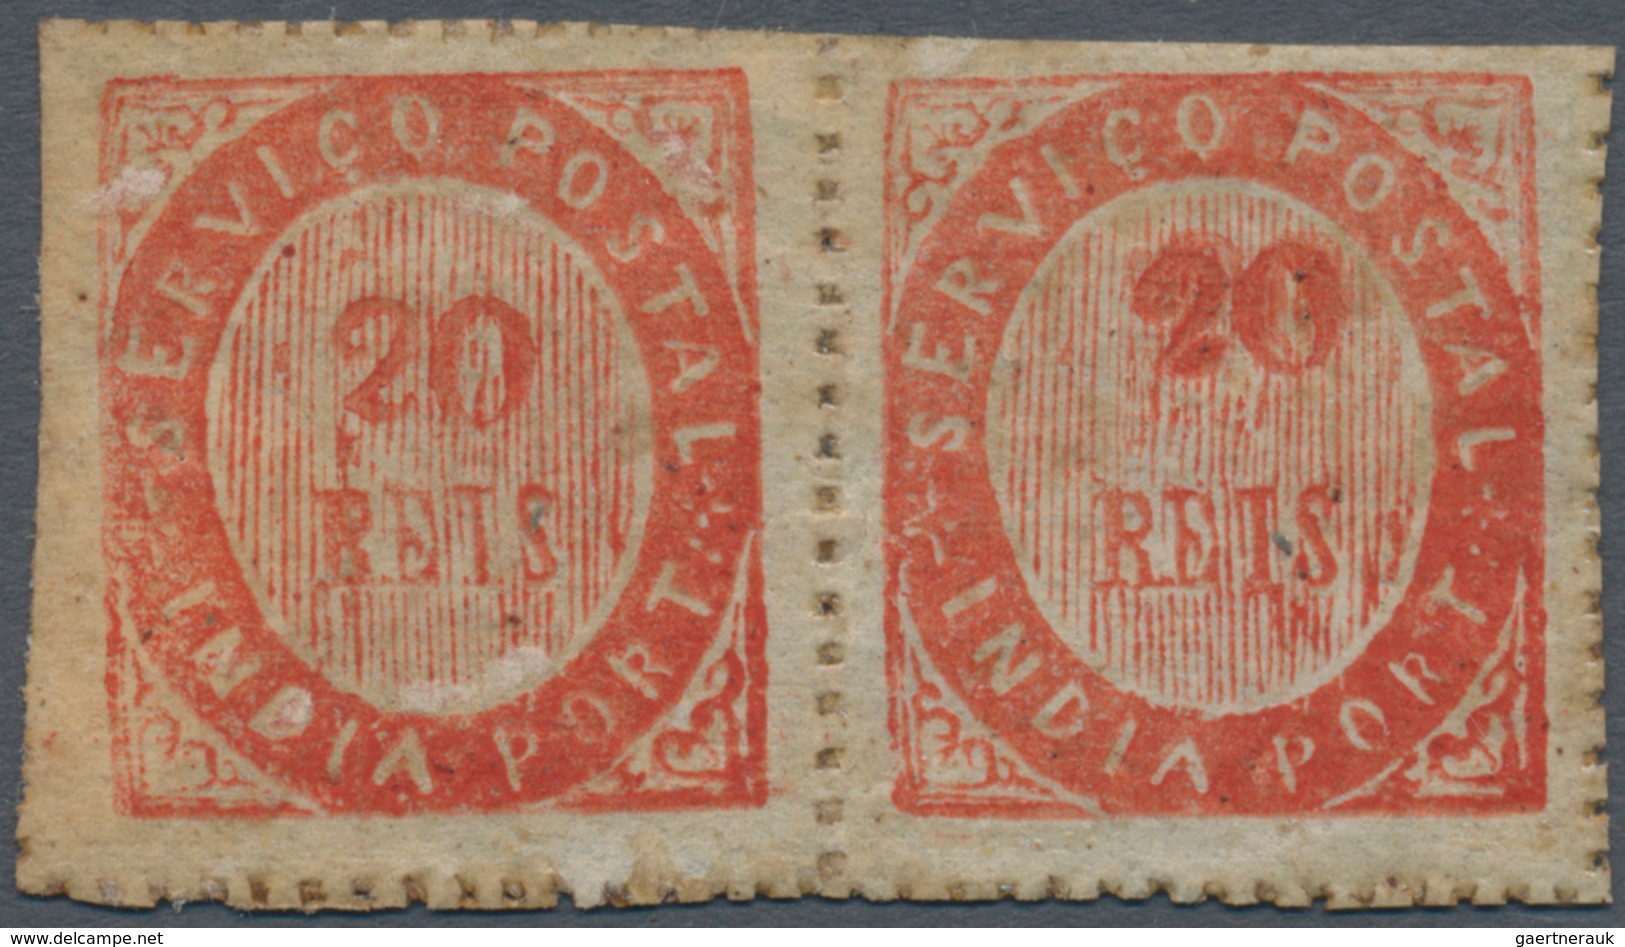 00428 Portugiesisch-Indien: 1873, Type I 20 R. Vermilion, A Horizontal Pair, Right Stamp With Double Impre - Inde Portugaise